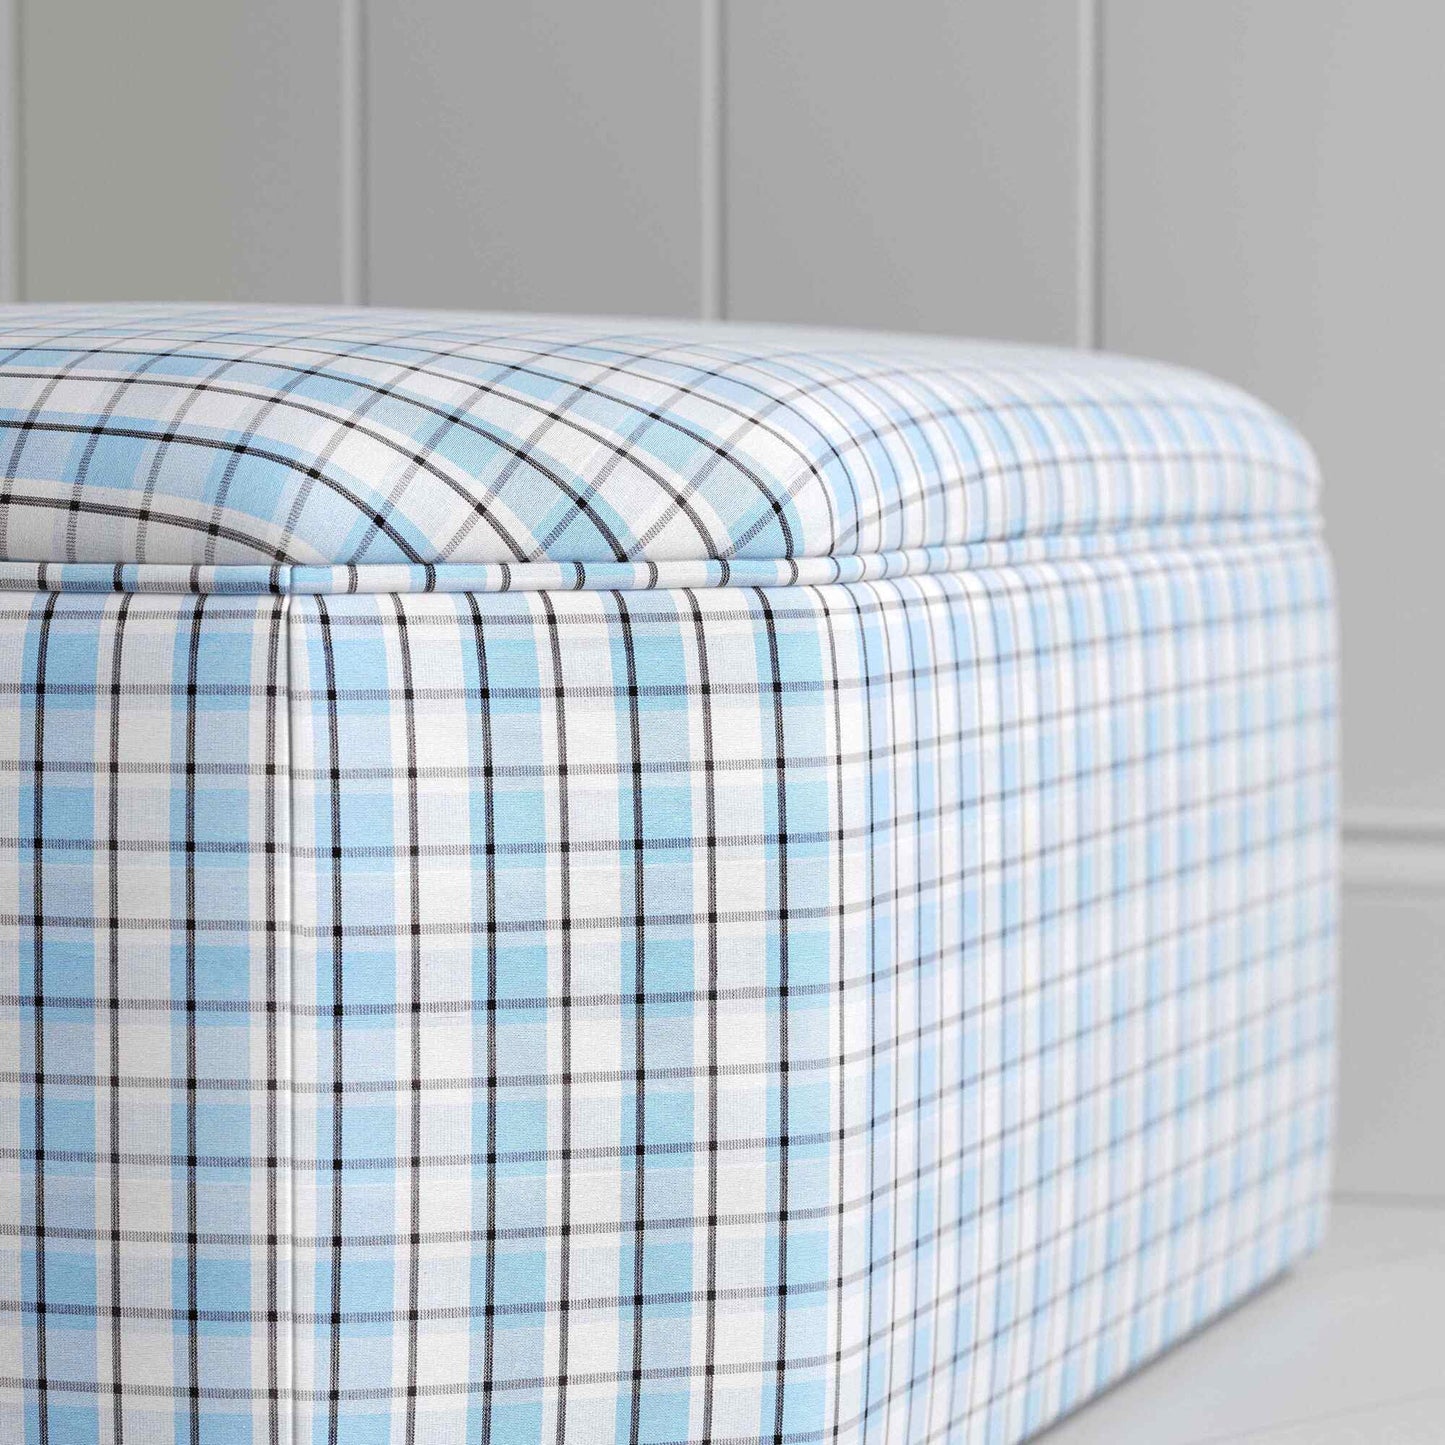 Hither Hexagonal Ottoman in Square Deal Cotton, Blue Brown